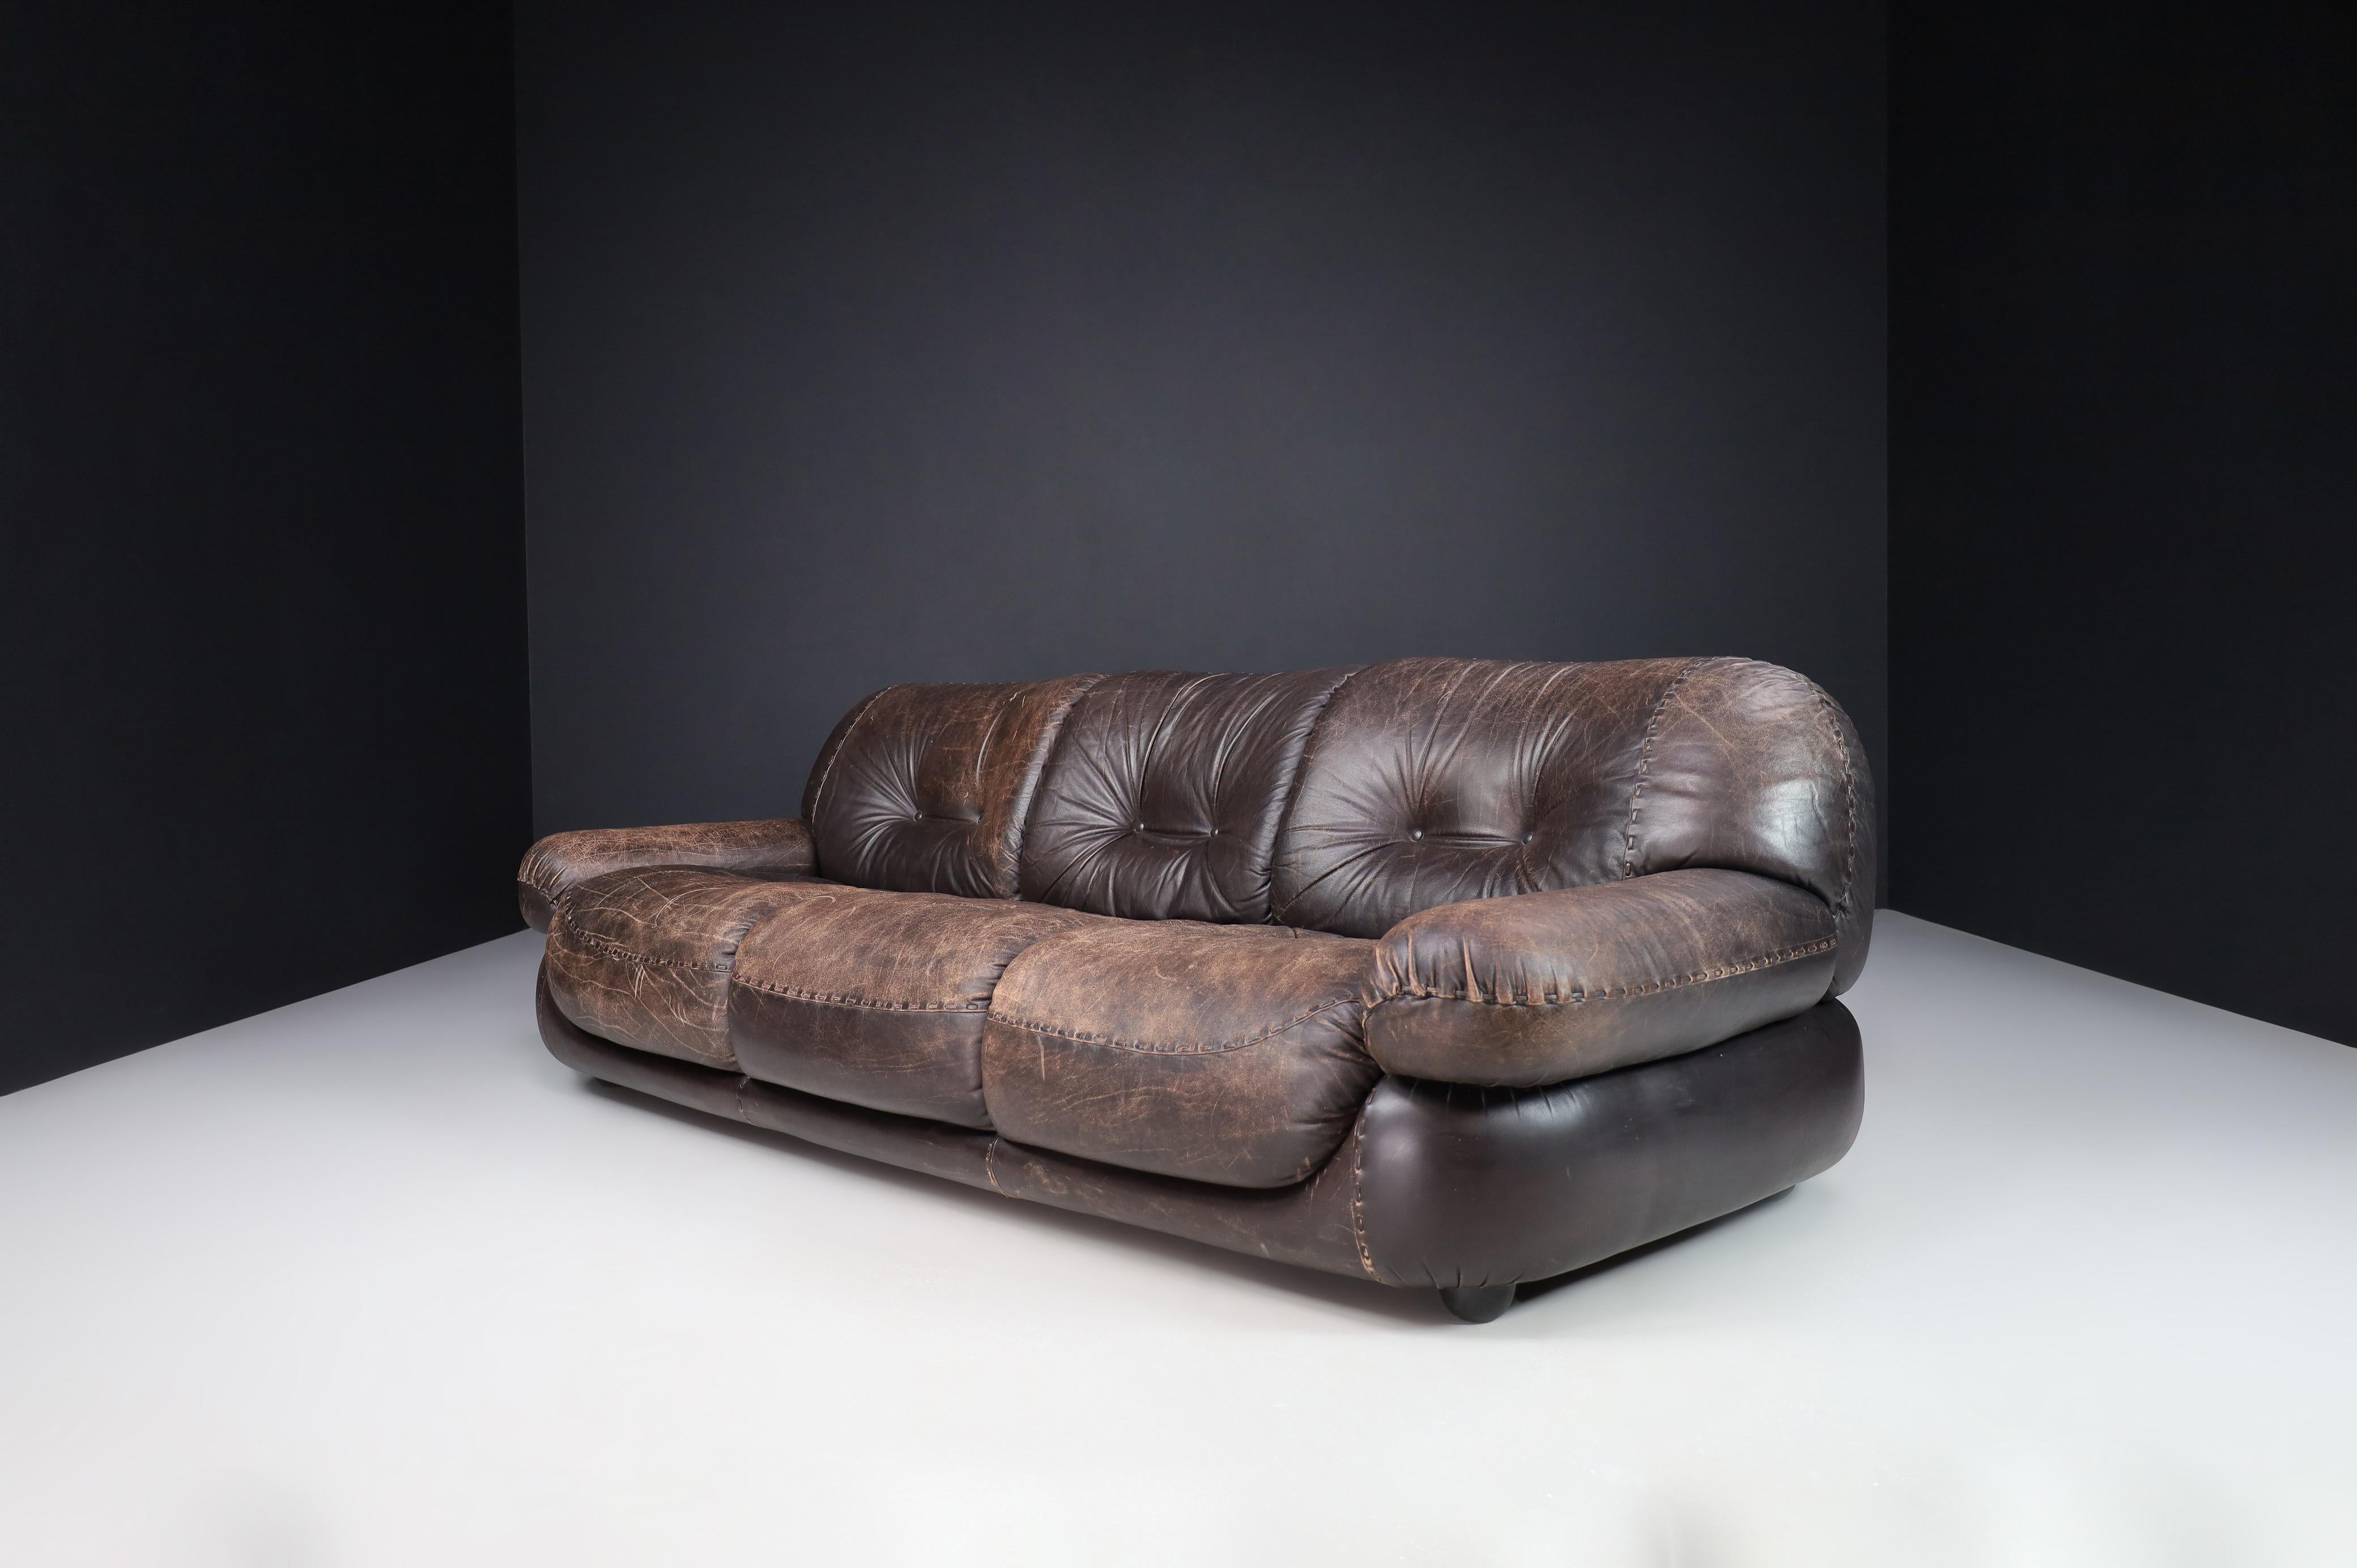 Large Lounge Sofa in Patinated Brown Leather by Sapporo for Mobil Girgi, Italy 1970

A large lounge sofa in leather by Sapporo for Mobil Girgi, Italy, in the 1970s. A large, fluffy, stylish lounge sofa that feature round lines and shapes invite